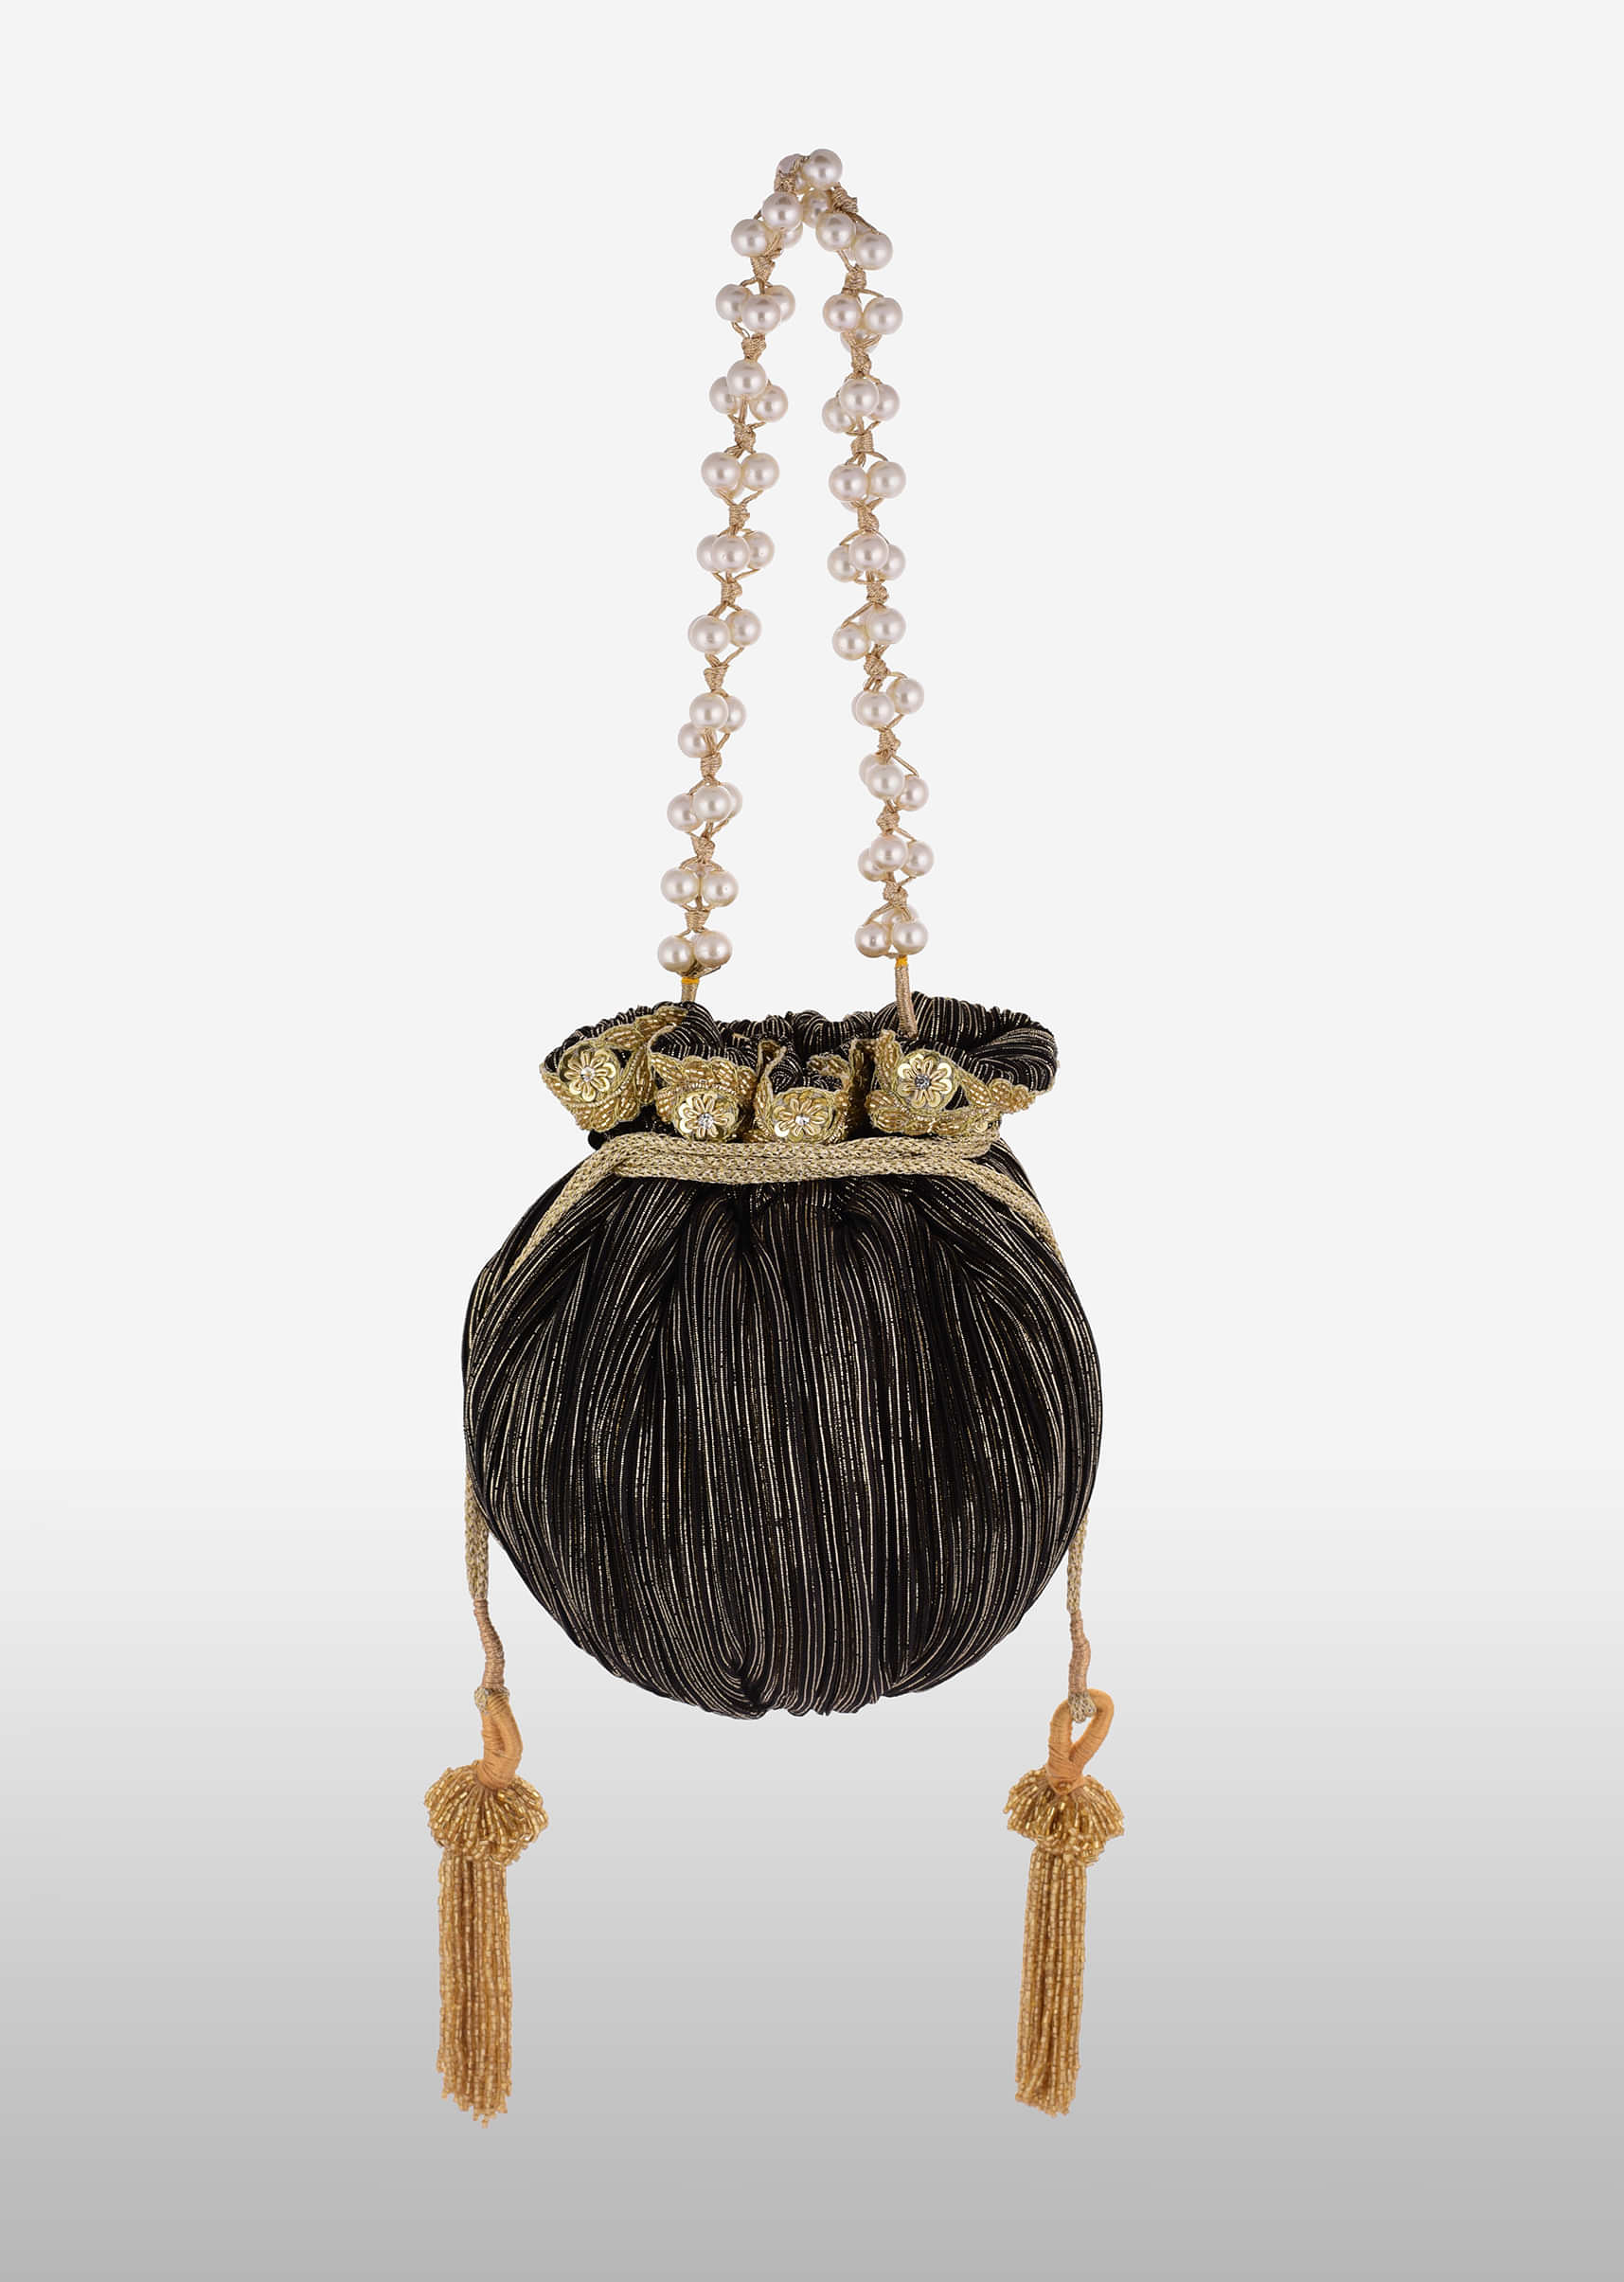 Black And Gold Potli Bag In Silk With Woven Golden Stripes And Cut Dana Embroidery Online - Kalki Fashion